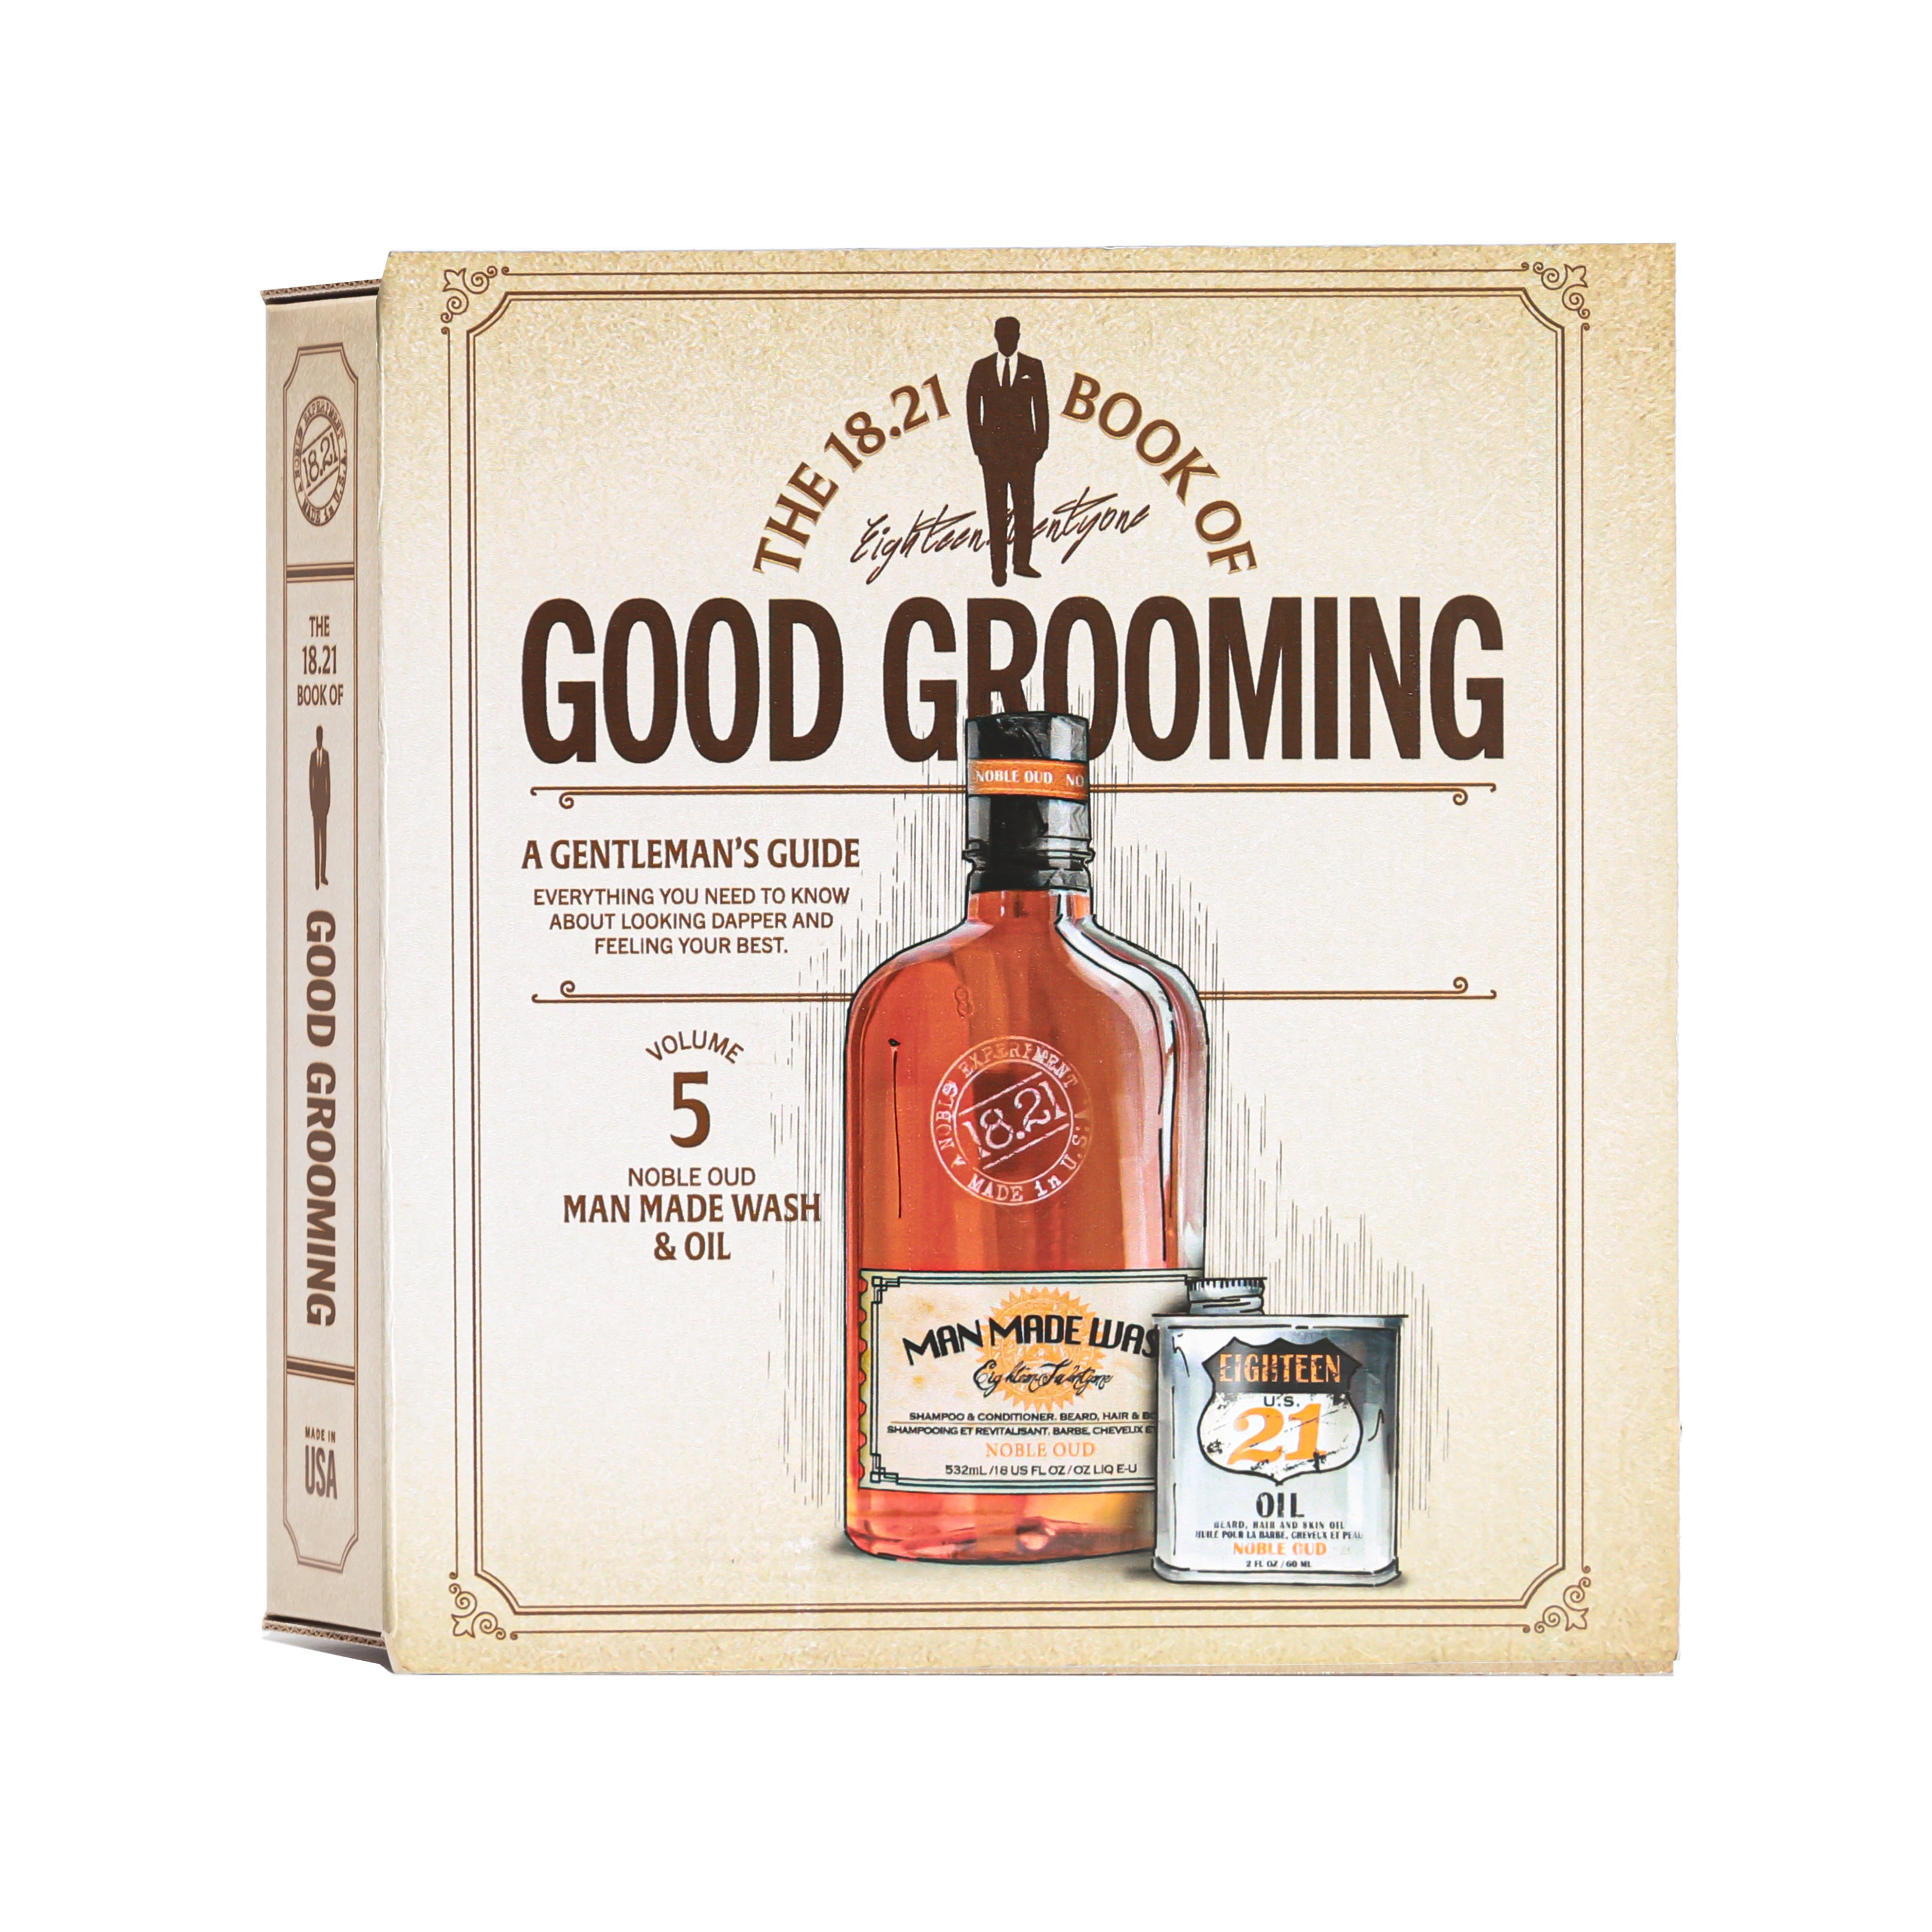 18.21 Man Made Book of Good Grooming Volume 5:  Man Made Wash 18oz and Beard, Hair Skin  Oil in Noble Oud Scent